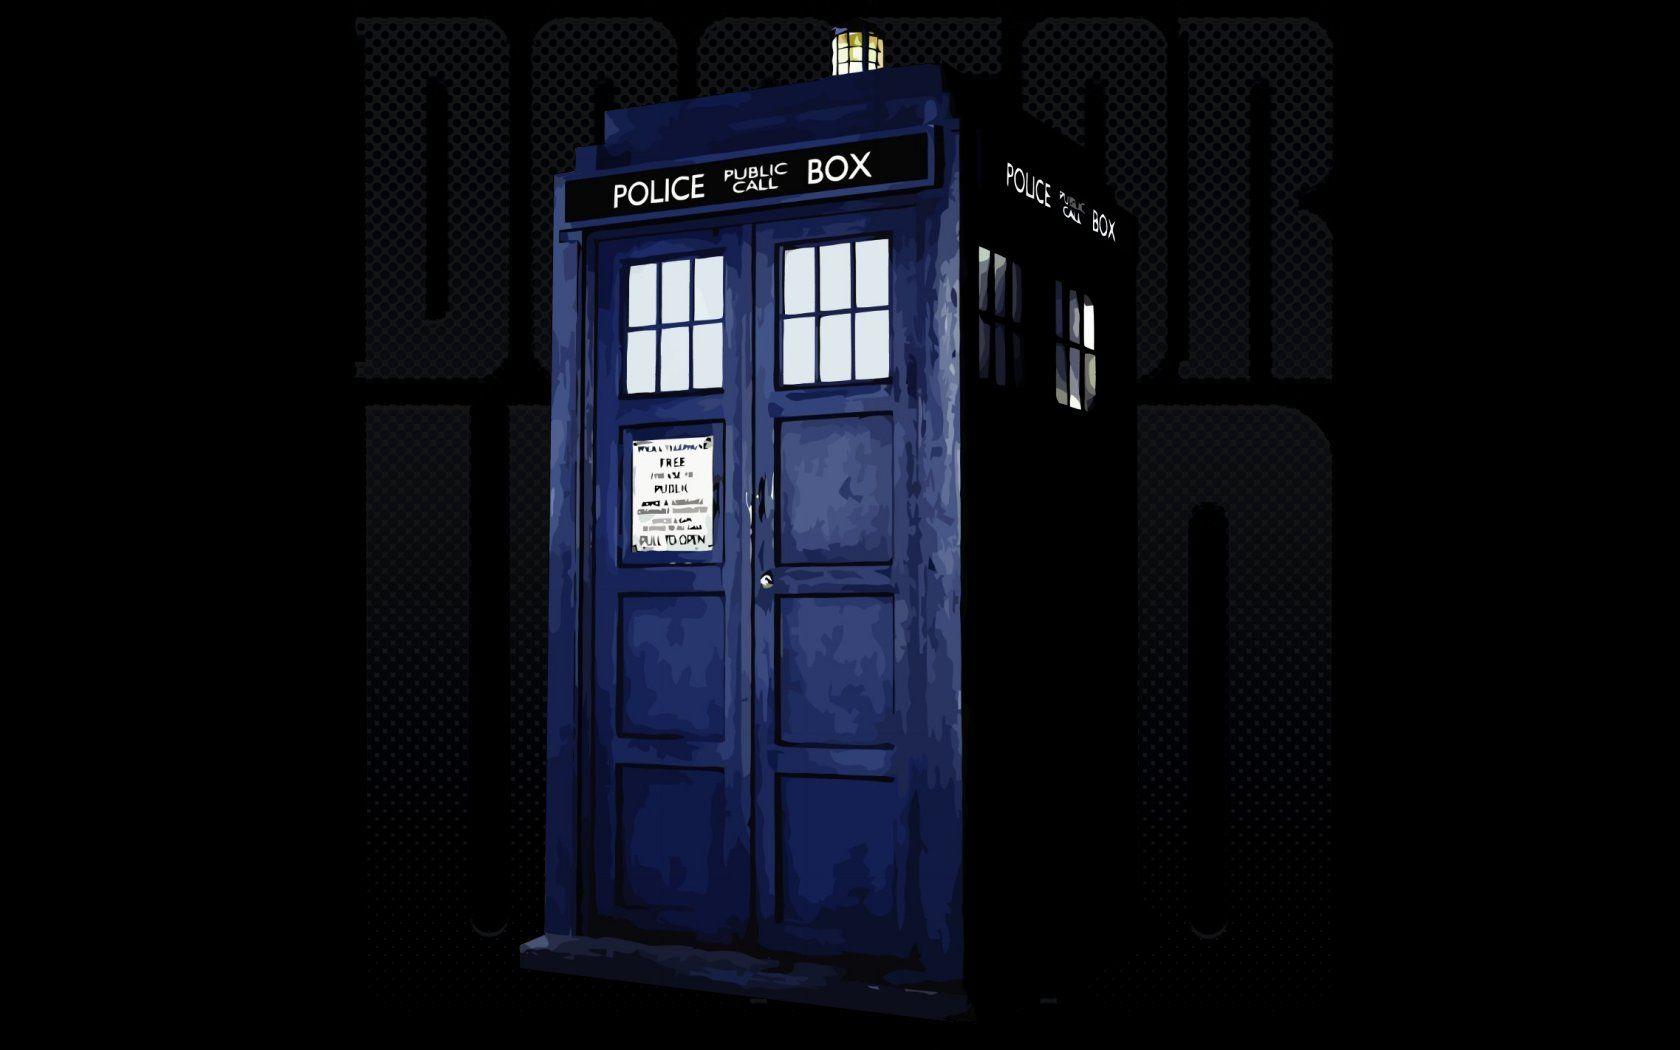 Doctor Who iPhone Wallpaper